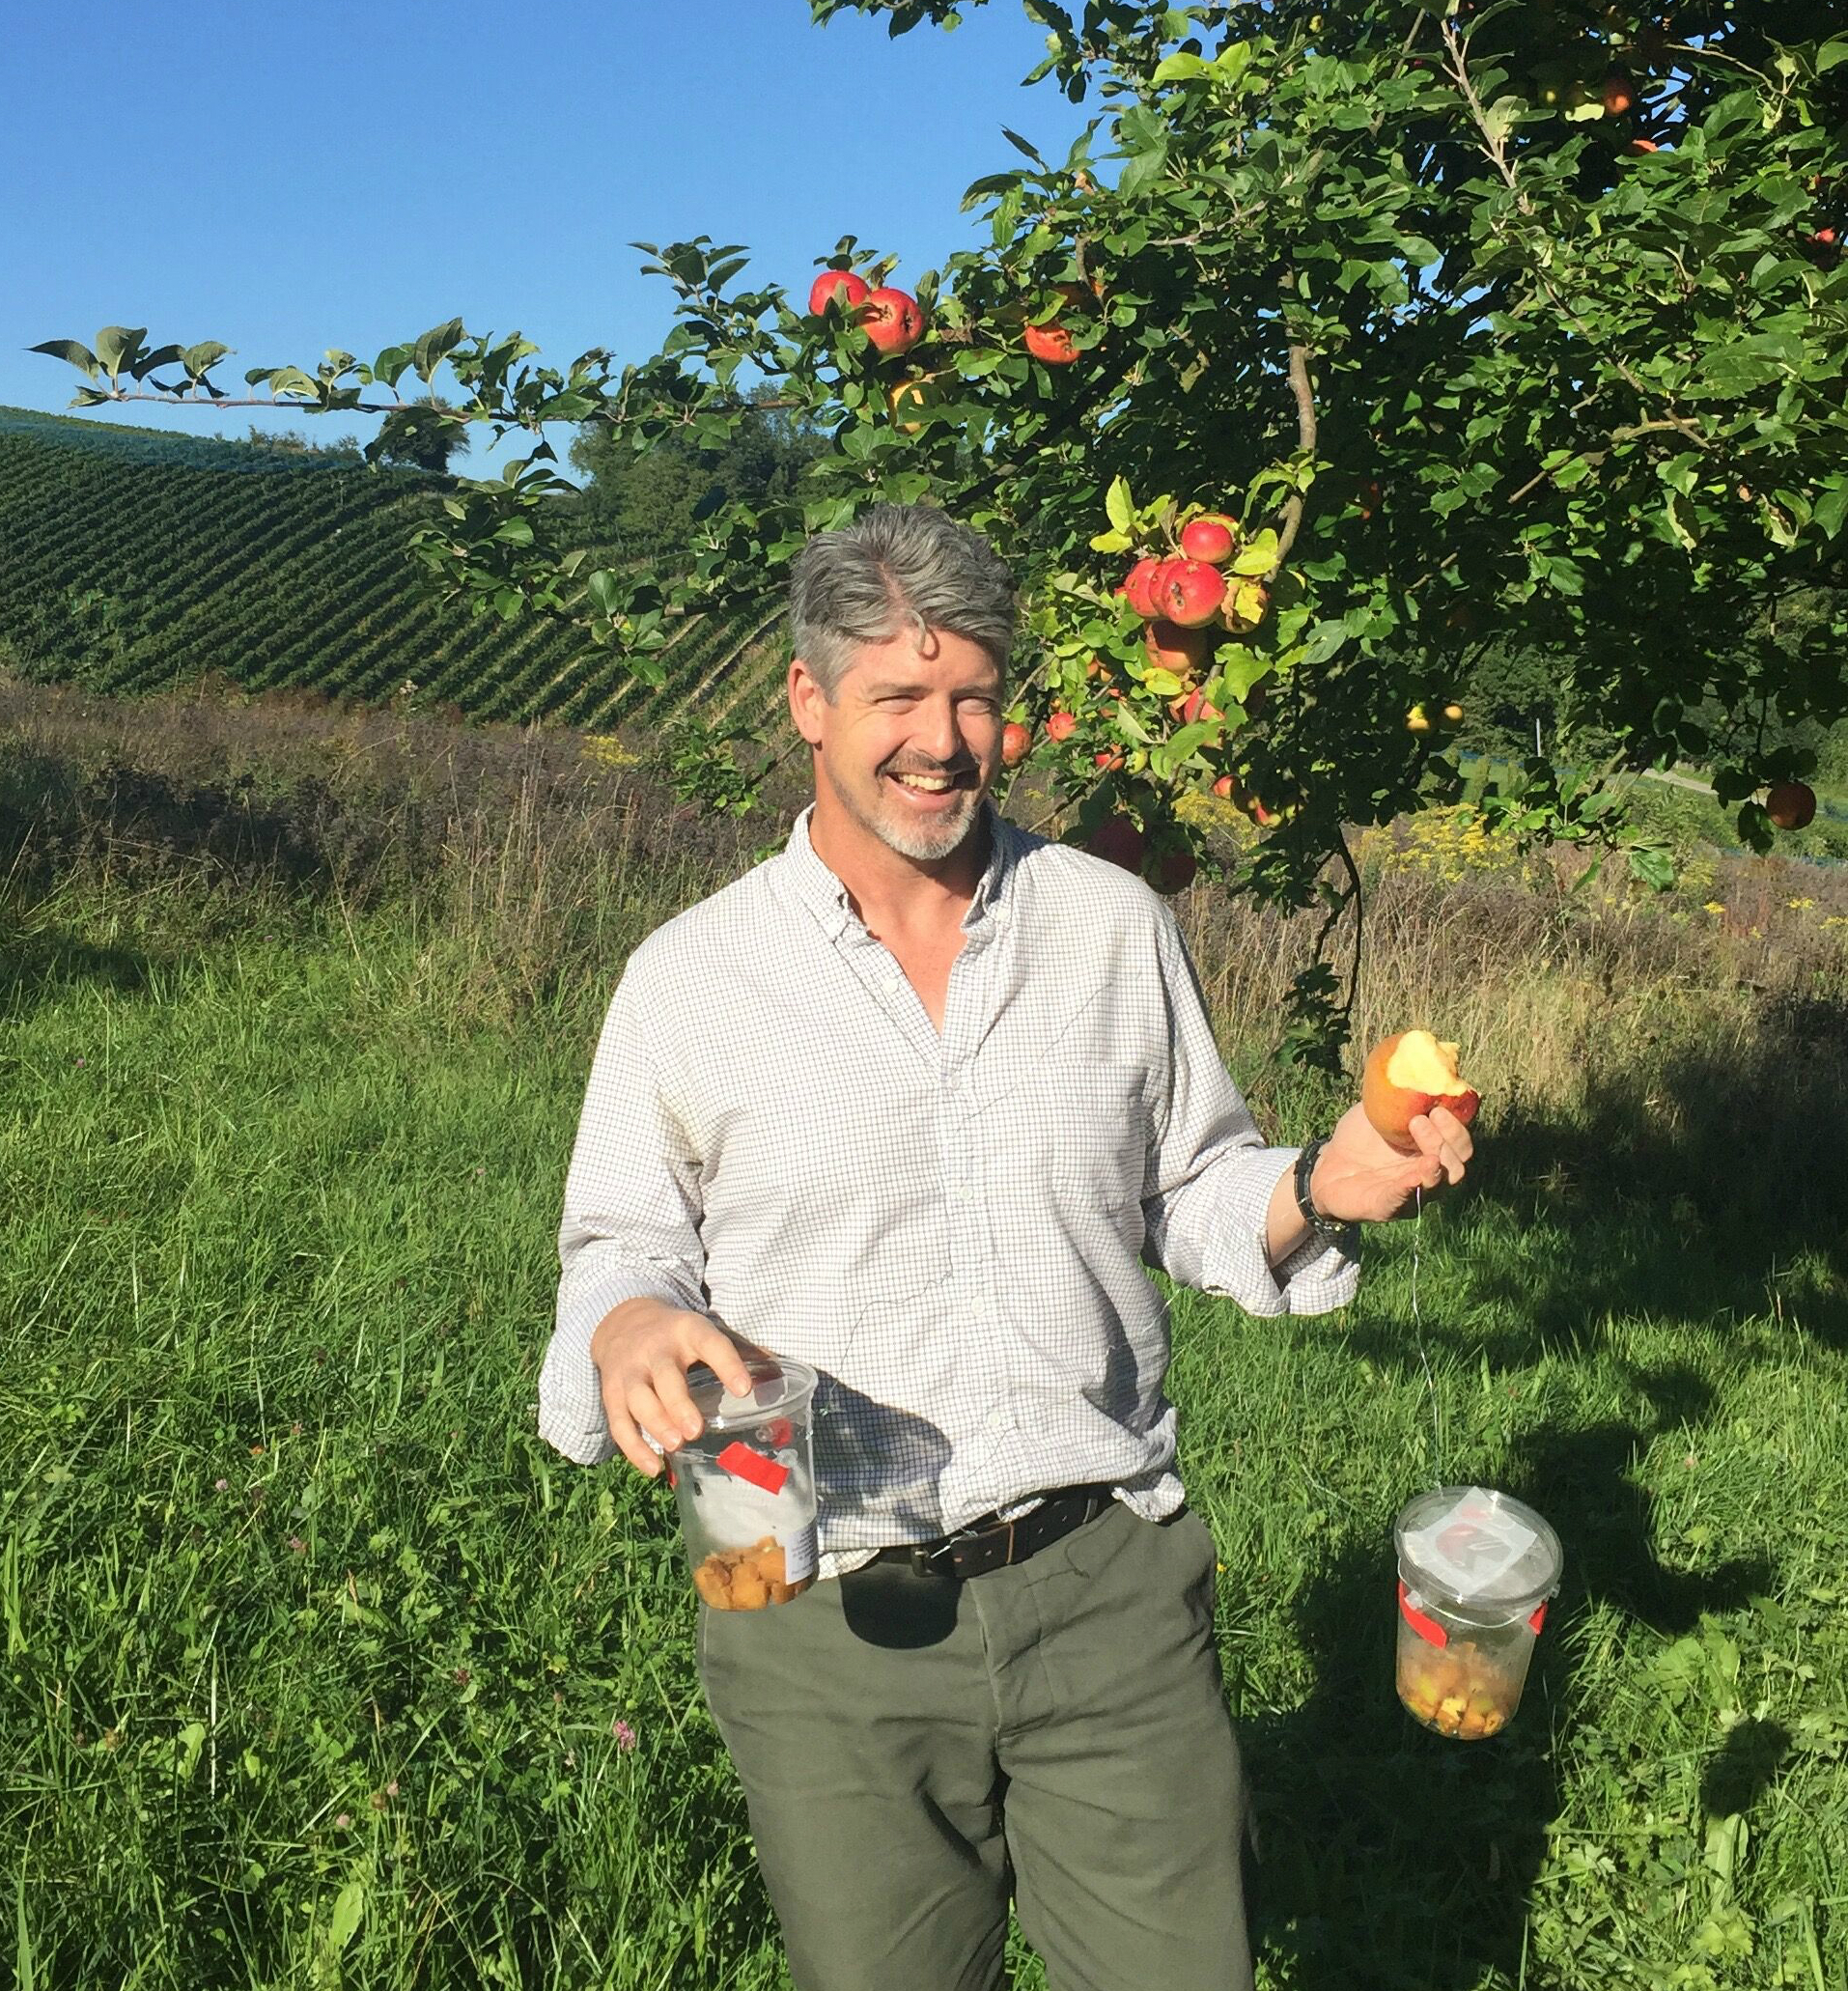 person standing in front of an apple tree in an agricultural setting holding half-eaten apple and plastic containers